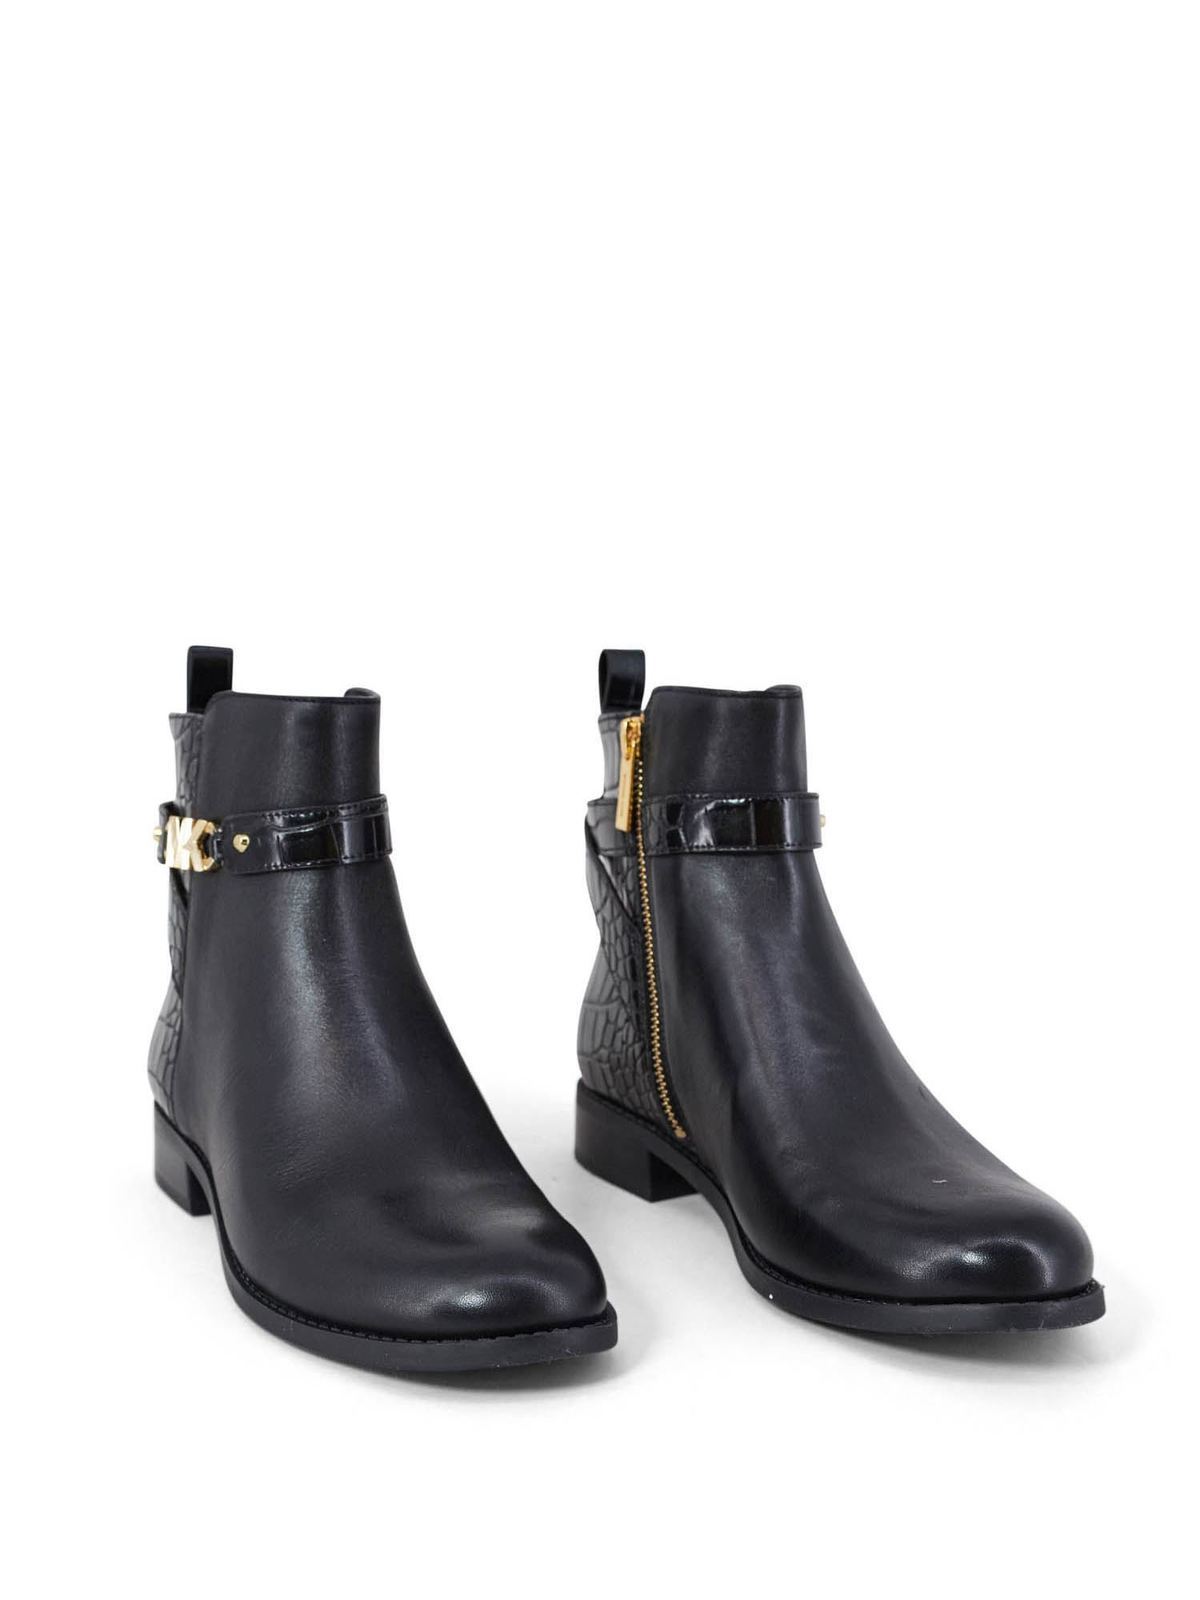 Ankle boots Michael Kors - Farrah Flat ankle boots in black -  40F1FHFE5LBLACK